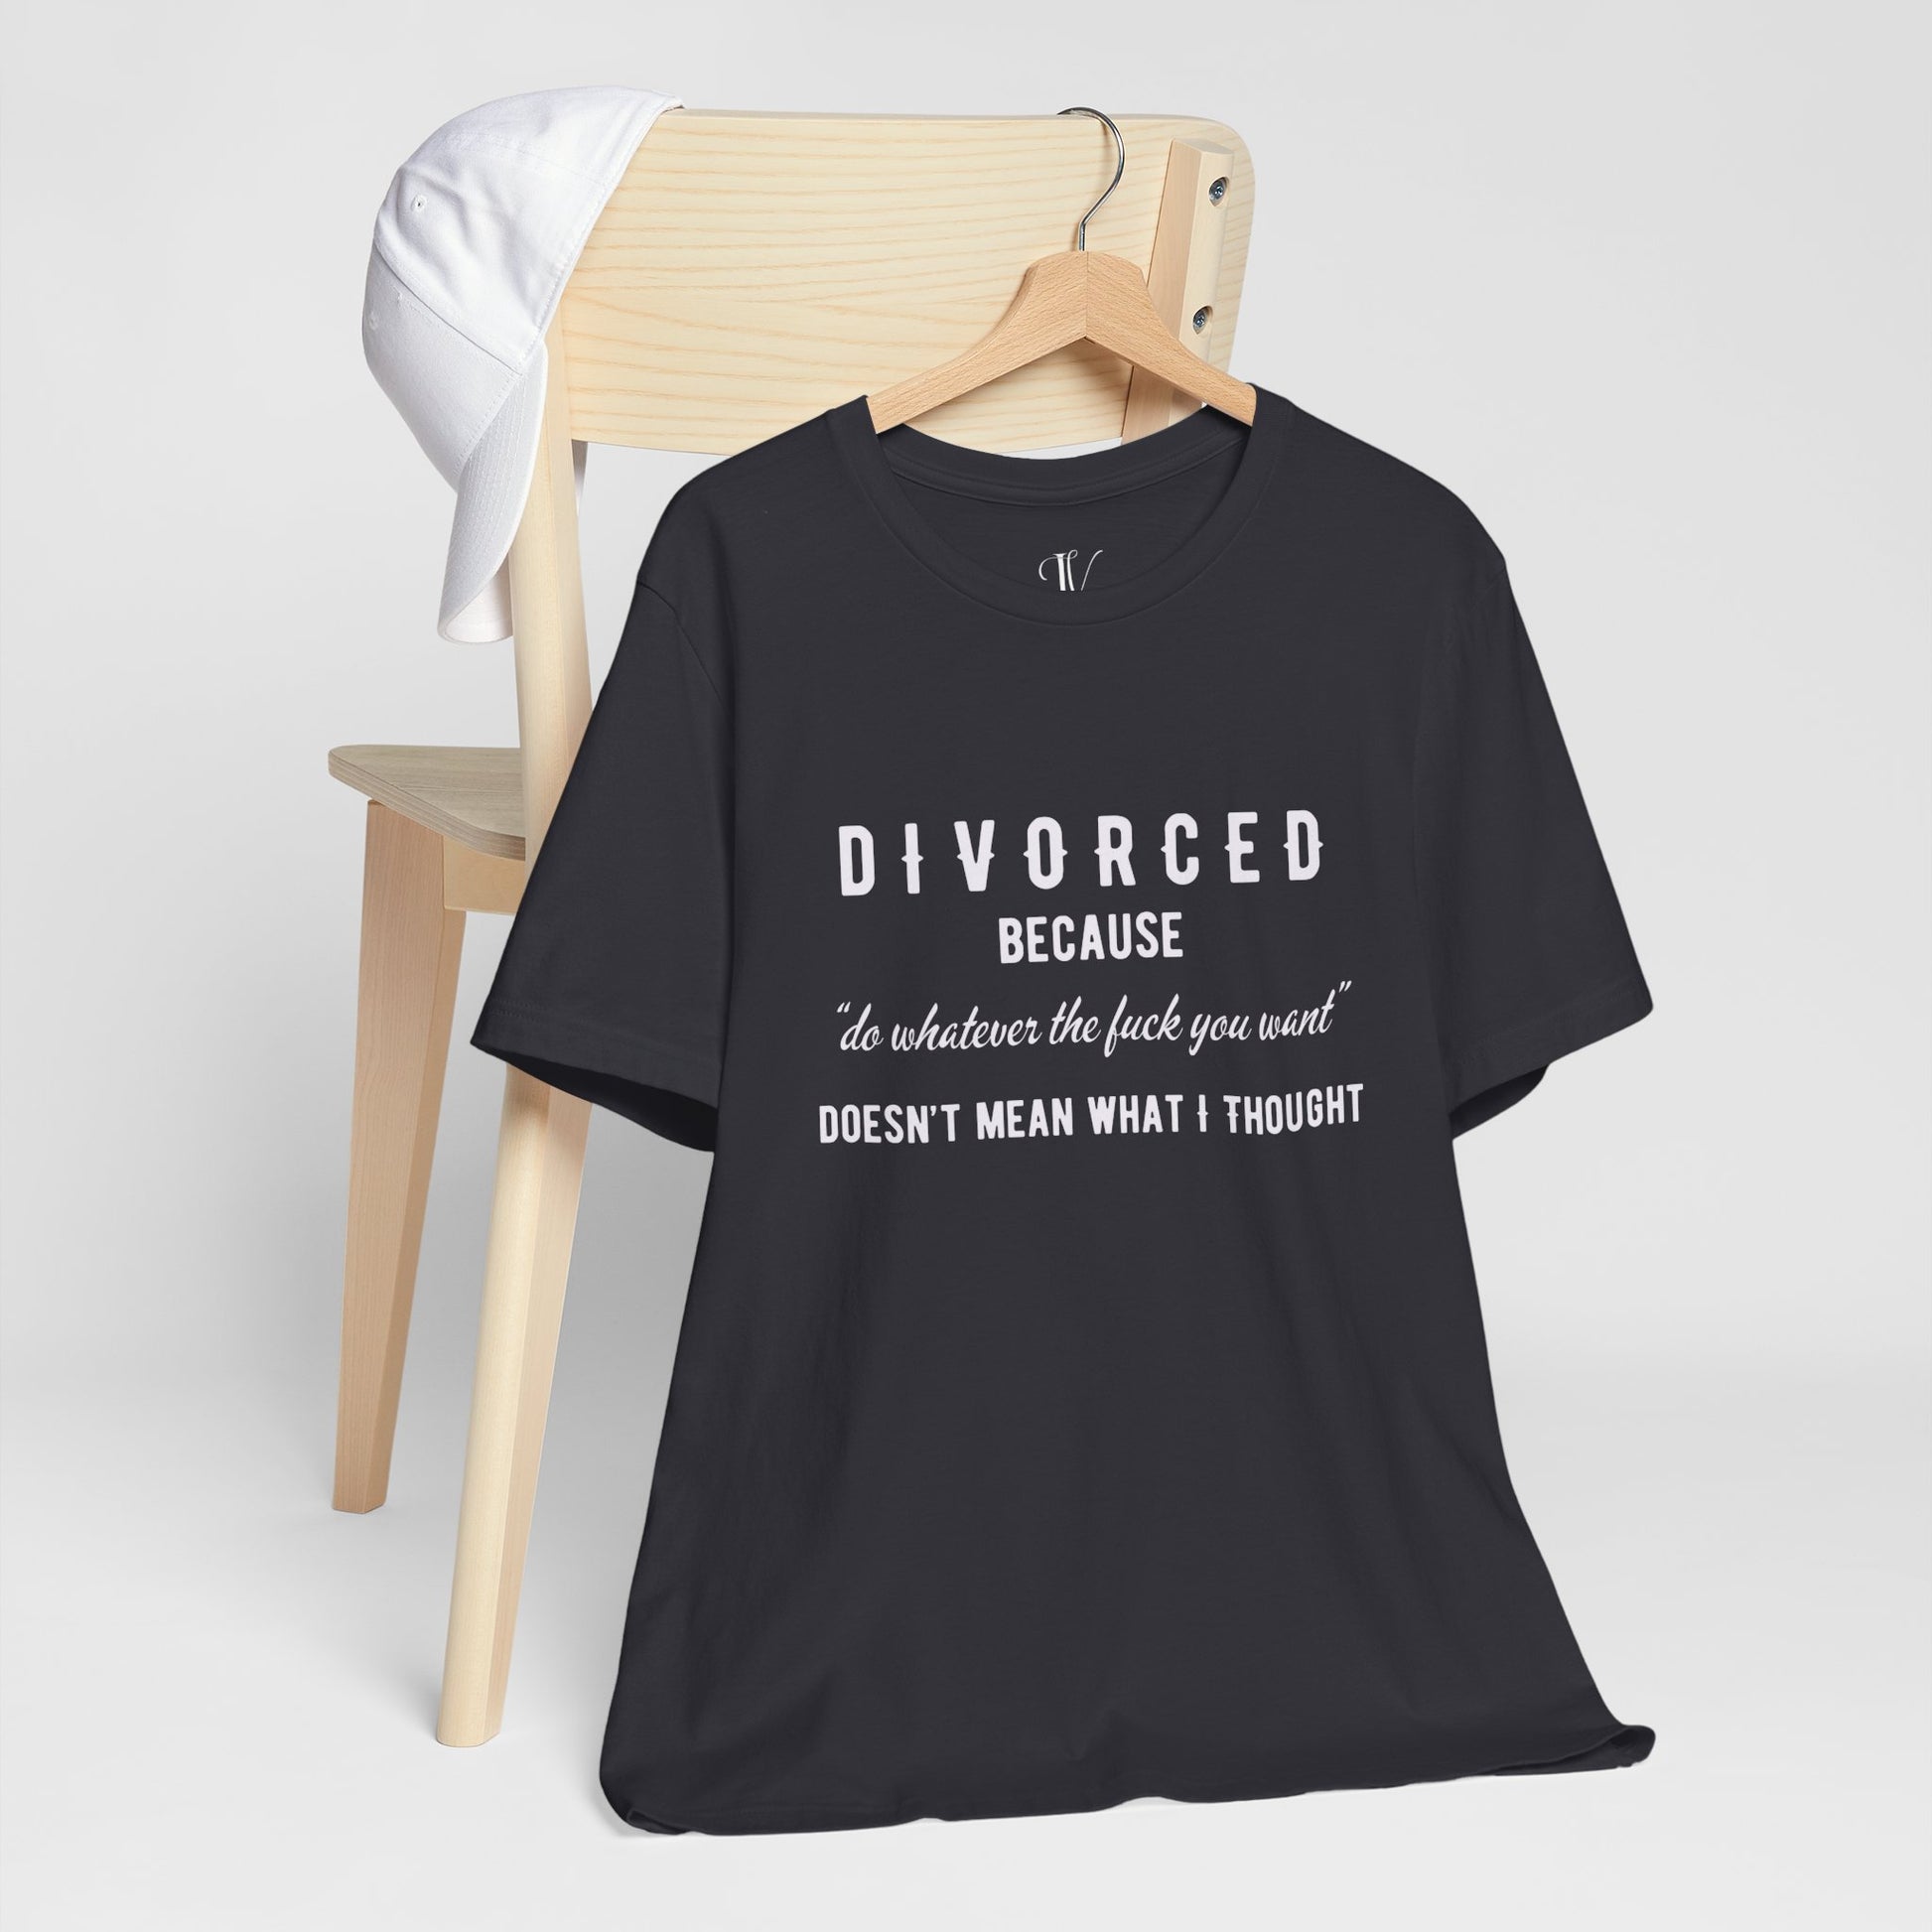 Divorced Shirt - Funny Divorce Party Gift for Ex-Husband or Ex-Wife T-Shirt Dark Grey XS 